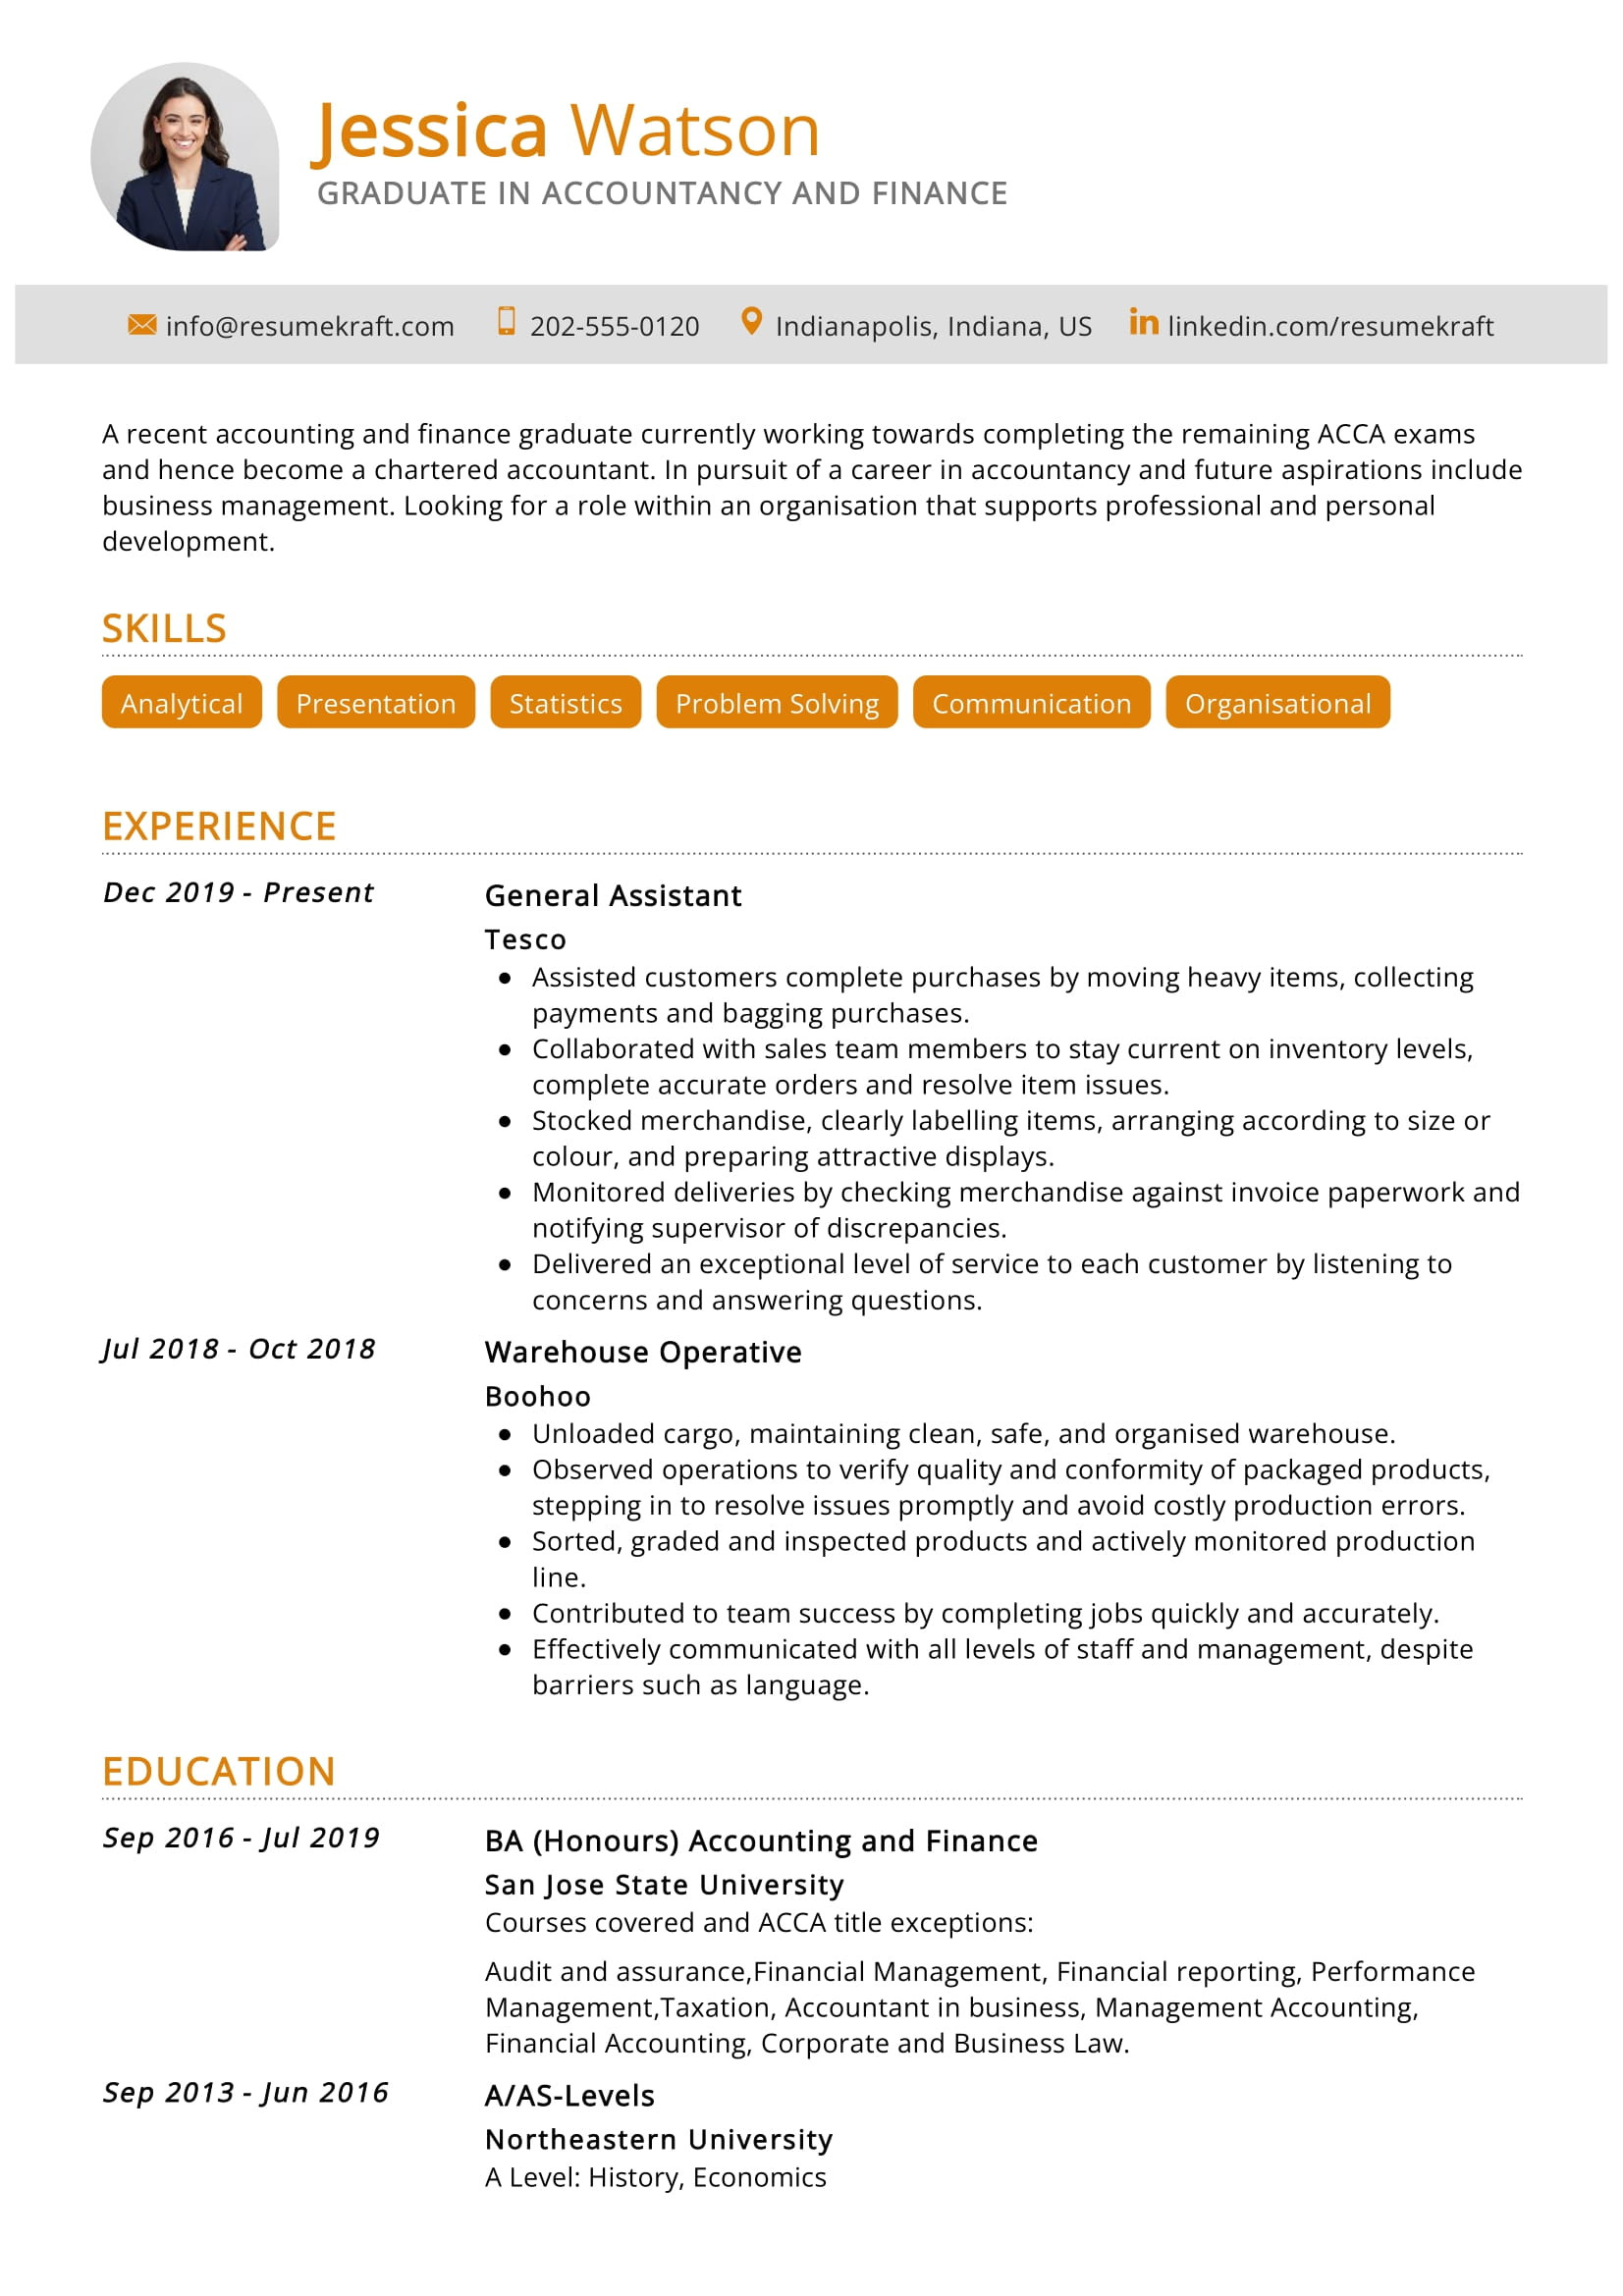 Resume Samples In Finance and Accounting Finance Graduate Resume Sample 2022 Writing Tips – Resumekraft